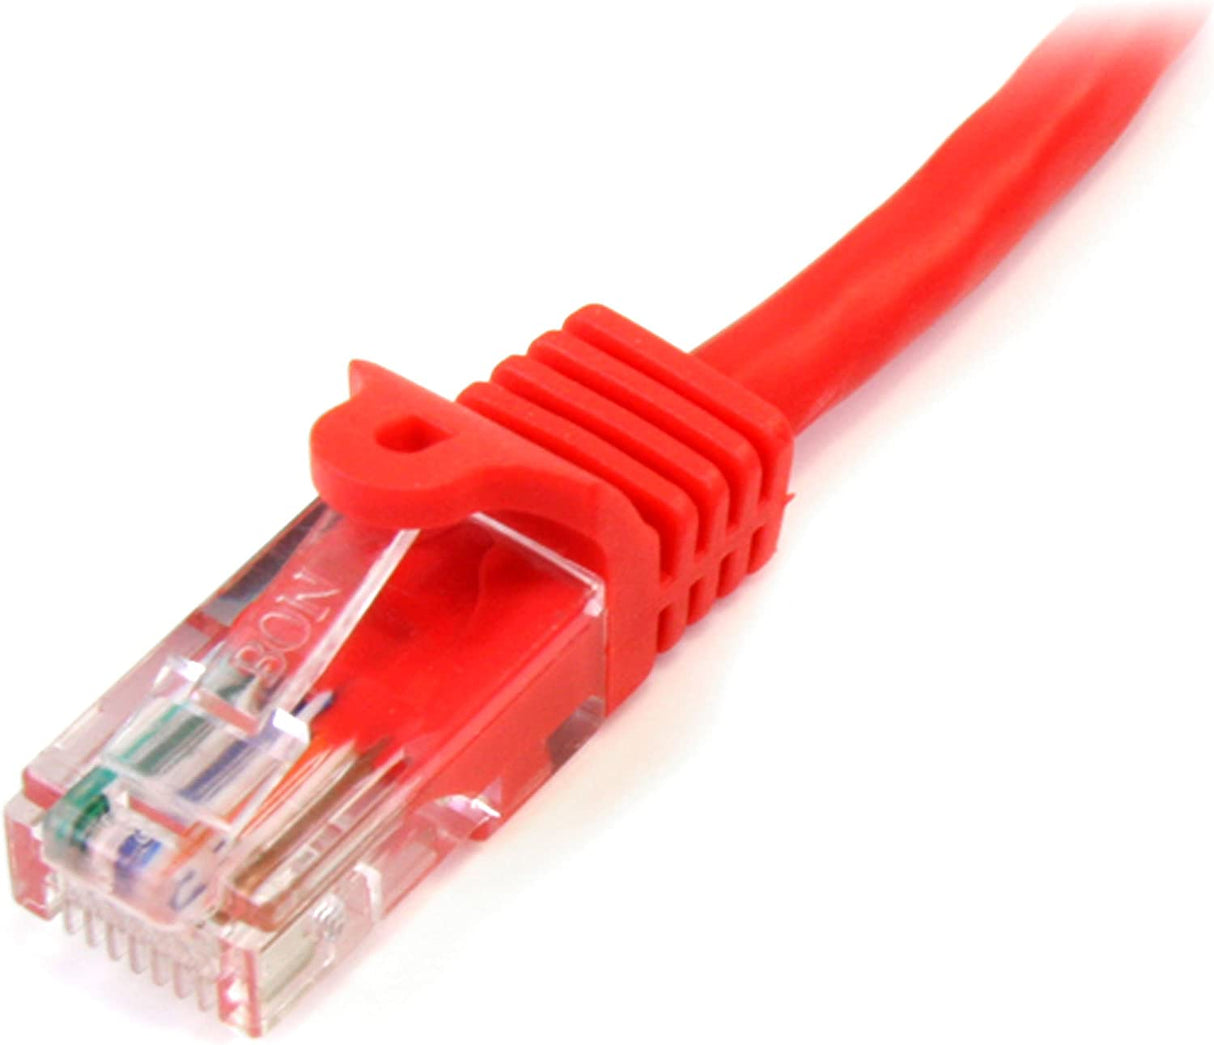 StarTech.com 6 ft. (1.8 m) Cat5e Ethernet Cable - Power Over Ethernet - Snagless - Red - Ethernet Network Cable (45PATCH6RD) 6 ft / 2m Red